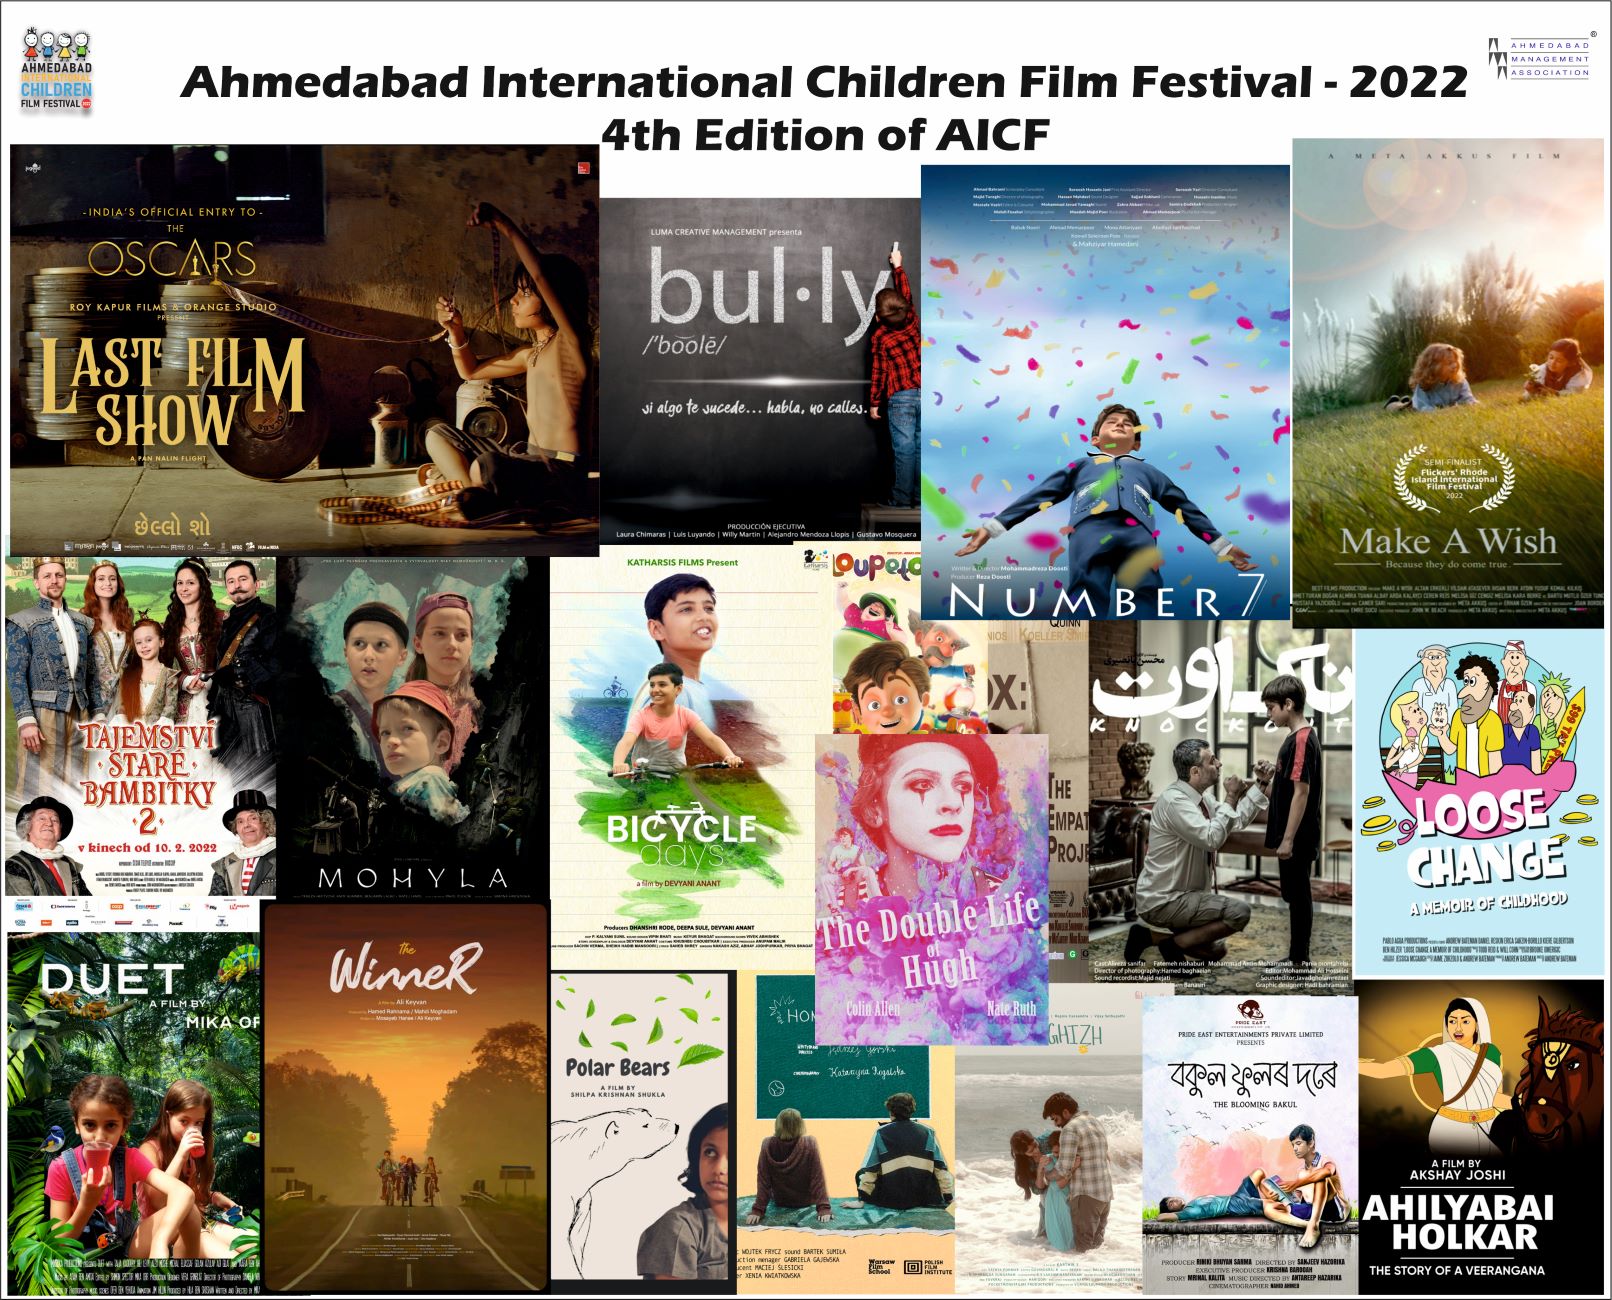 Ahmedabad International Children Film Festival to open with ‘Last Film Show’, India’s Oscar entry this year